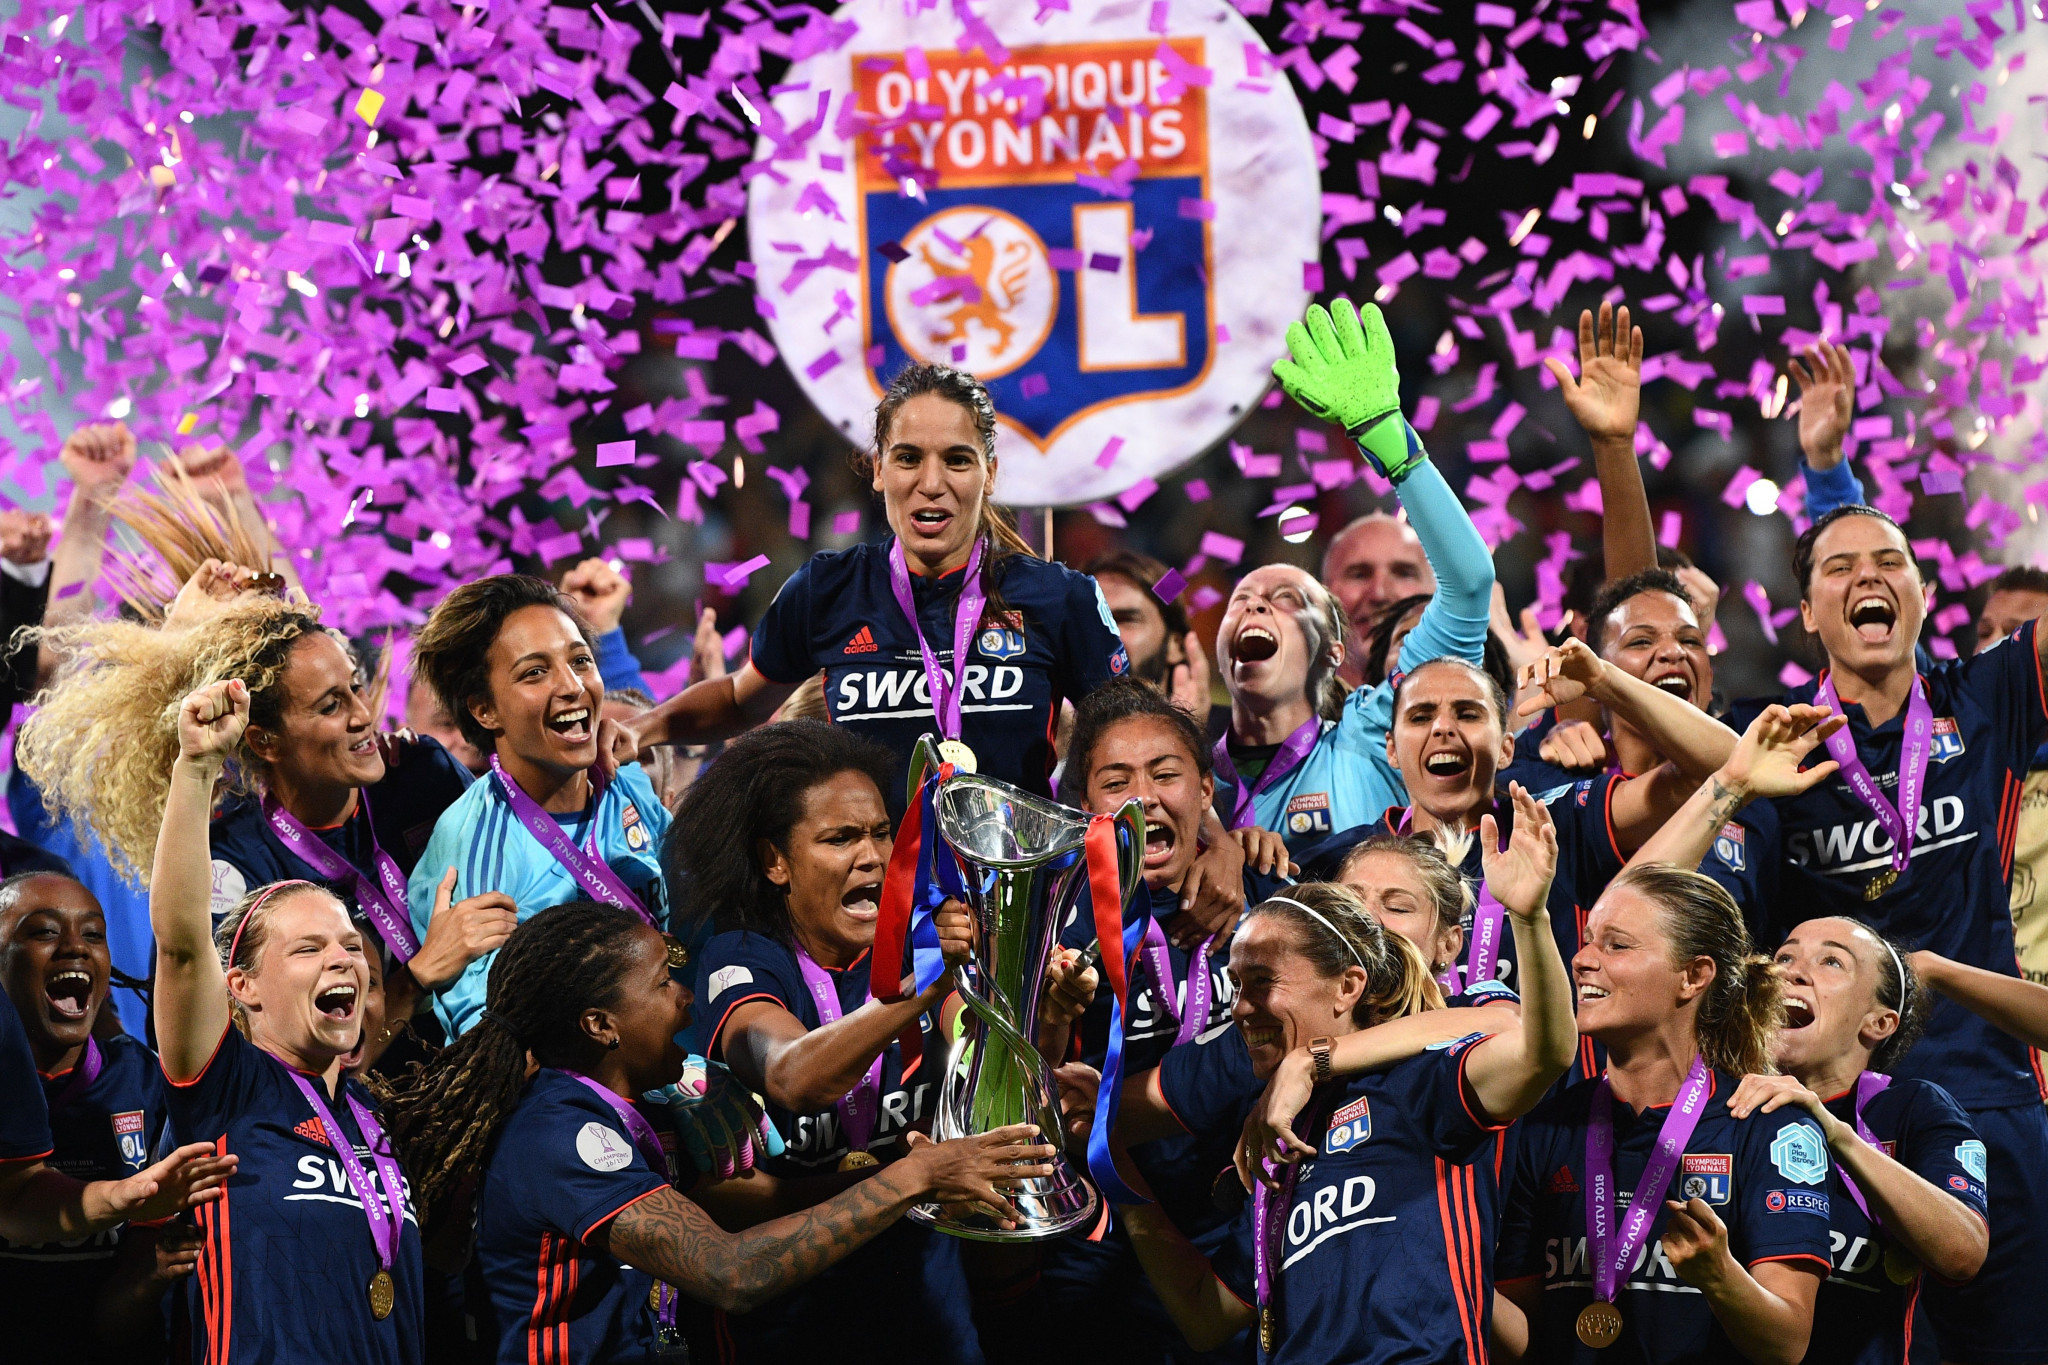 UEFA Women's Champions League victors Olympique Lyon of France will receive the second-highest payout from FIFA for the Women's World Cup currently taking place in France ©Getty Images